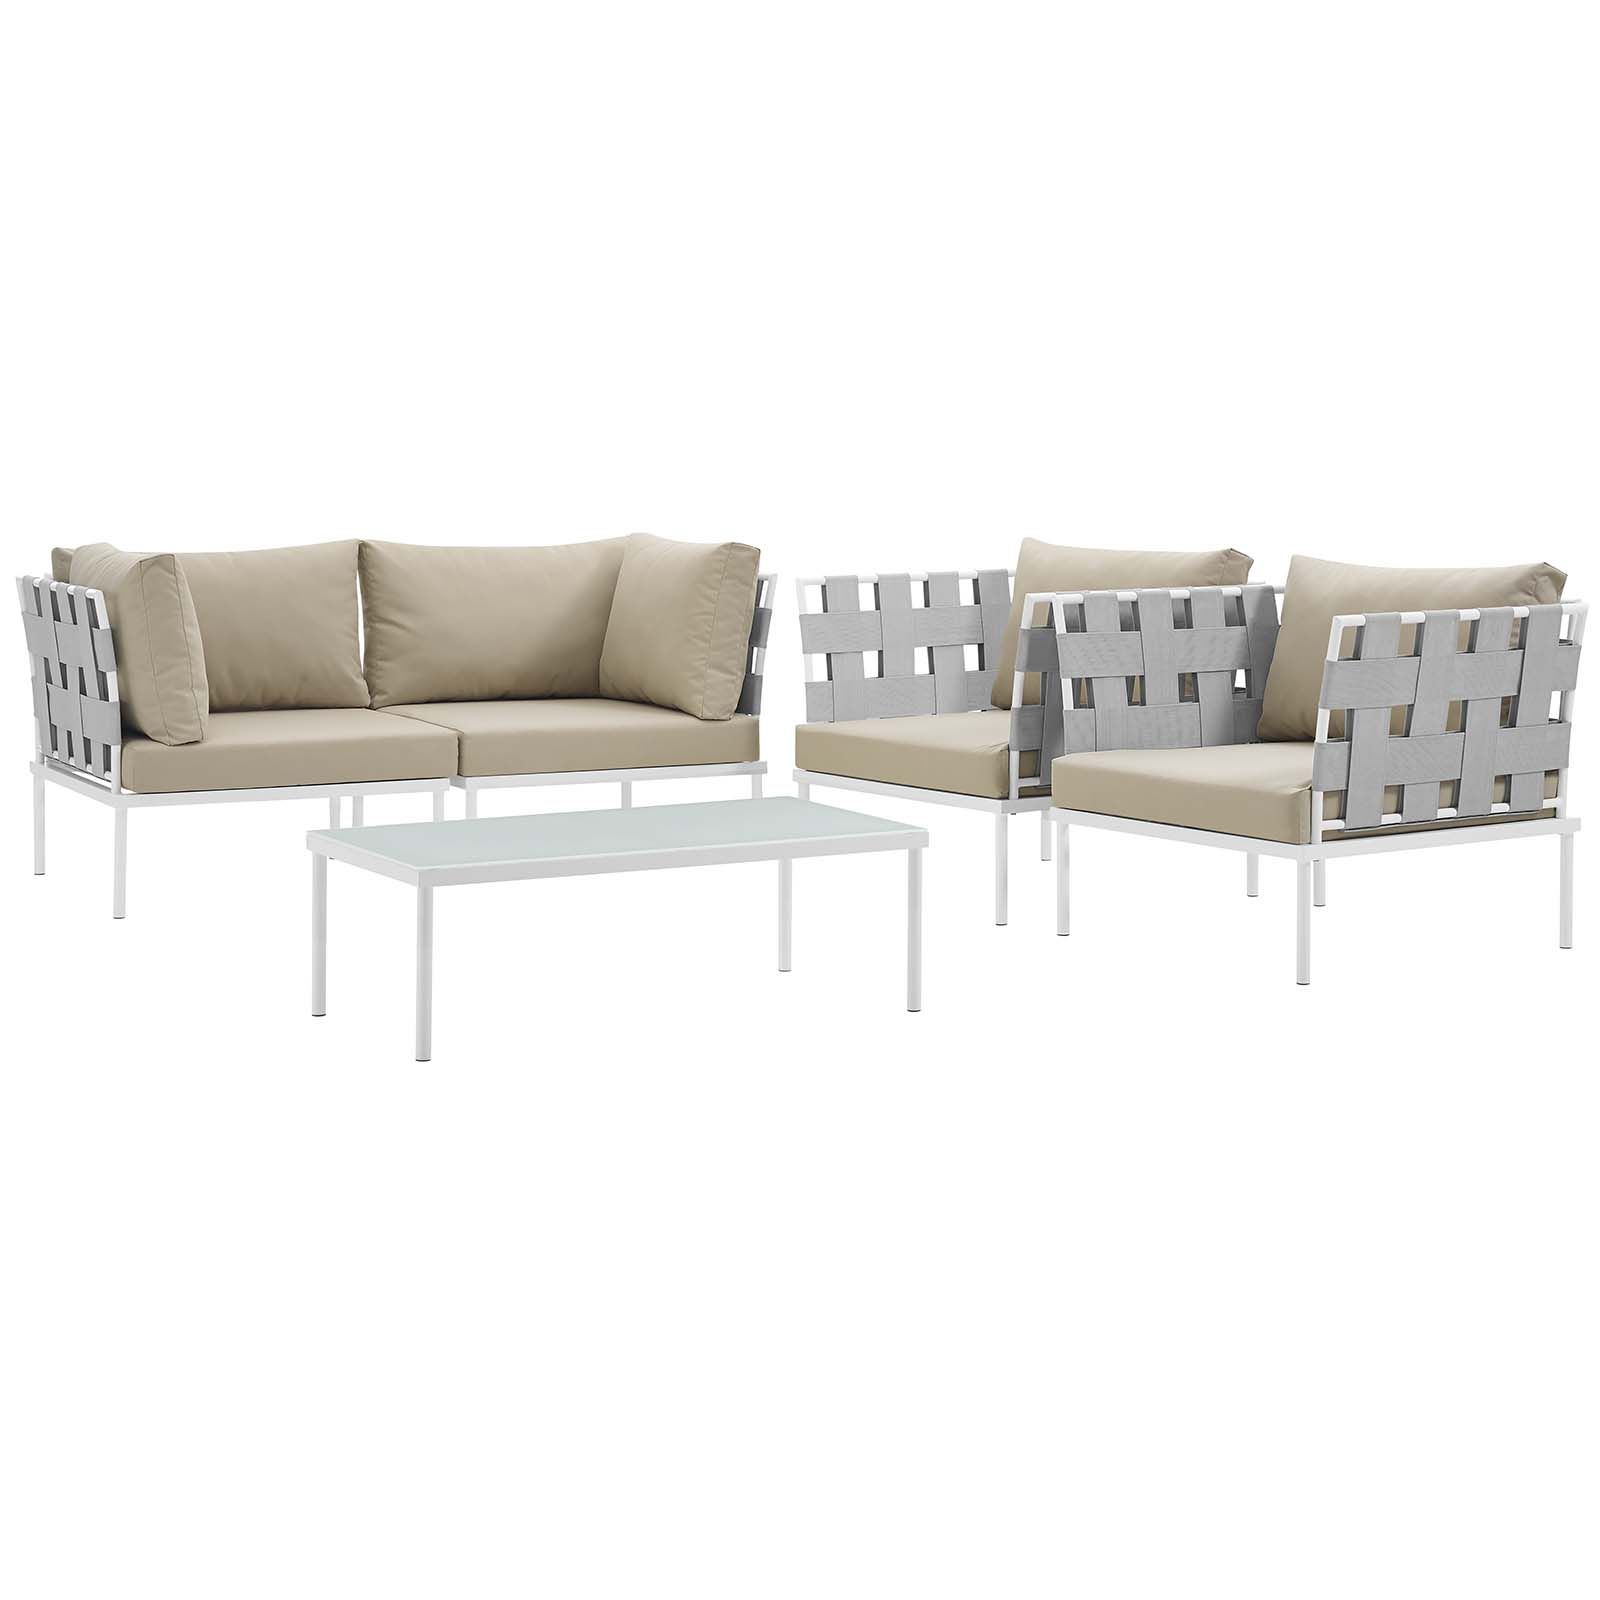 Modern Harmony 5 Piece Outdoor Patio Aluminum Sectional Within 5 Piece Console Tables (View 9 of 20)